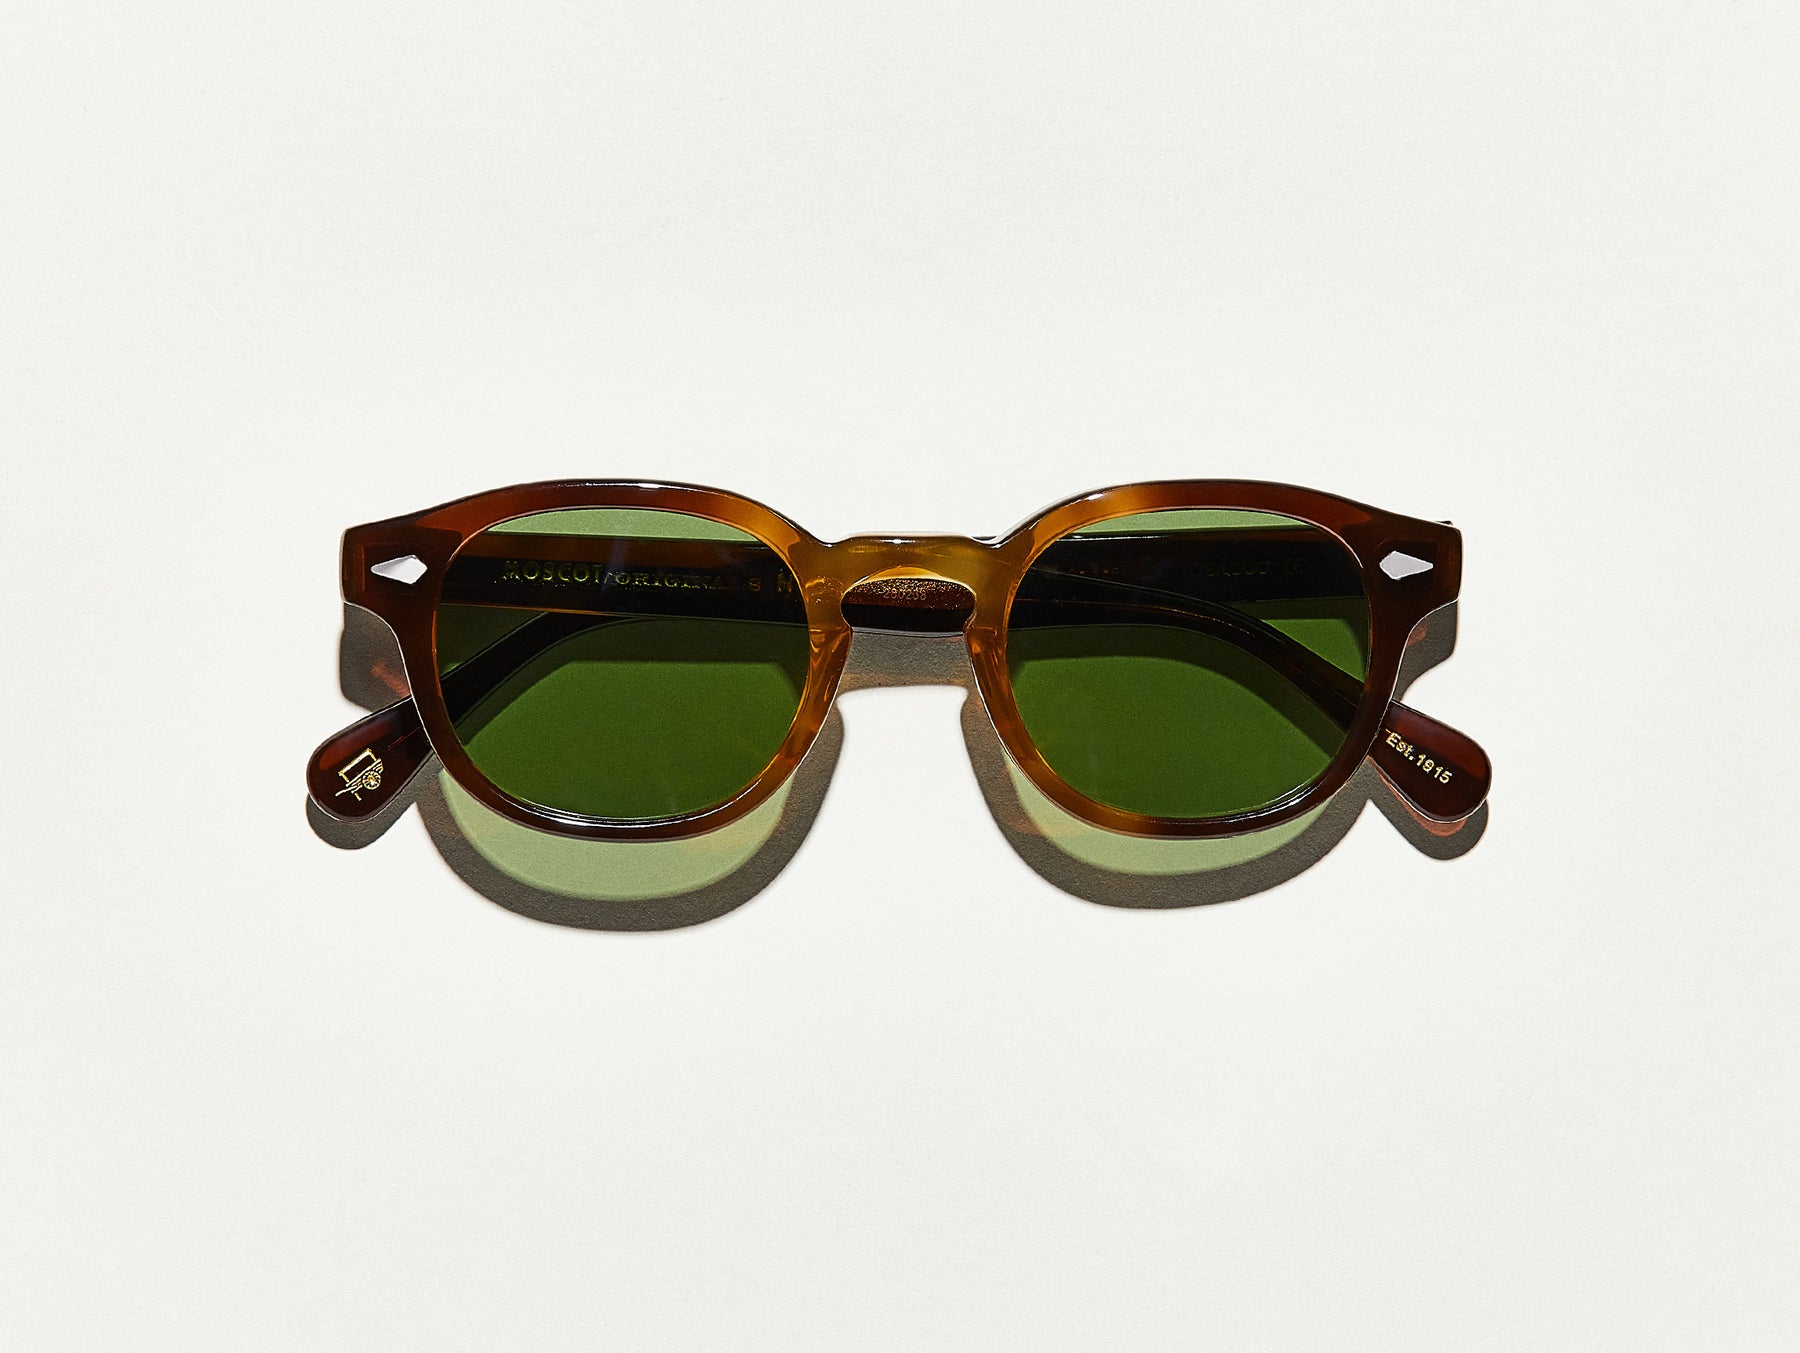 The LEMTOSH SUN in Tobacco with Calibar Green Glass Lenses